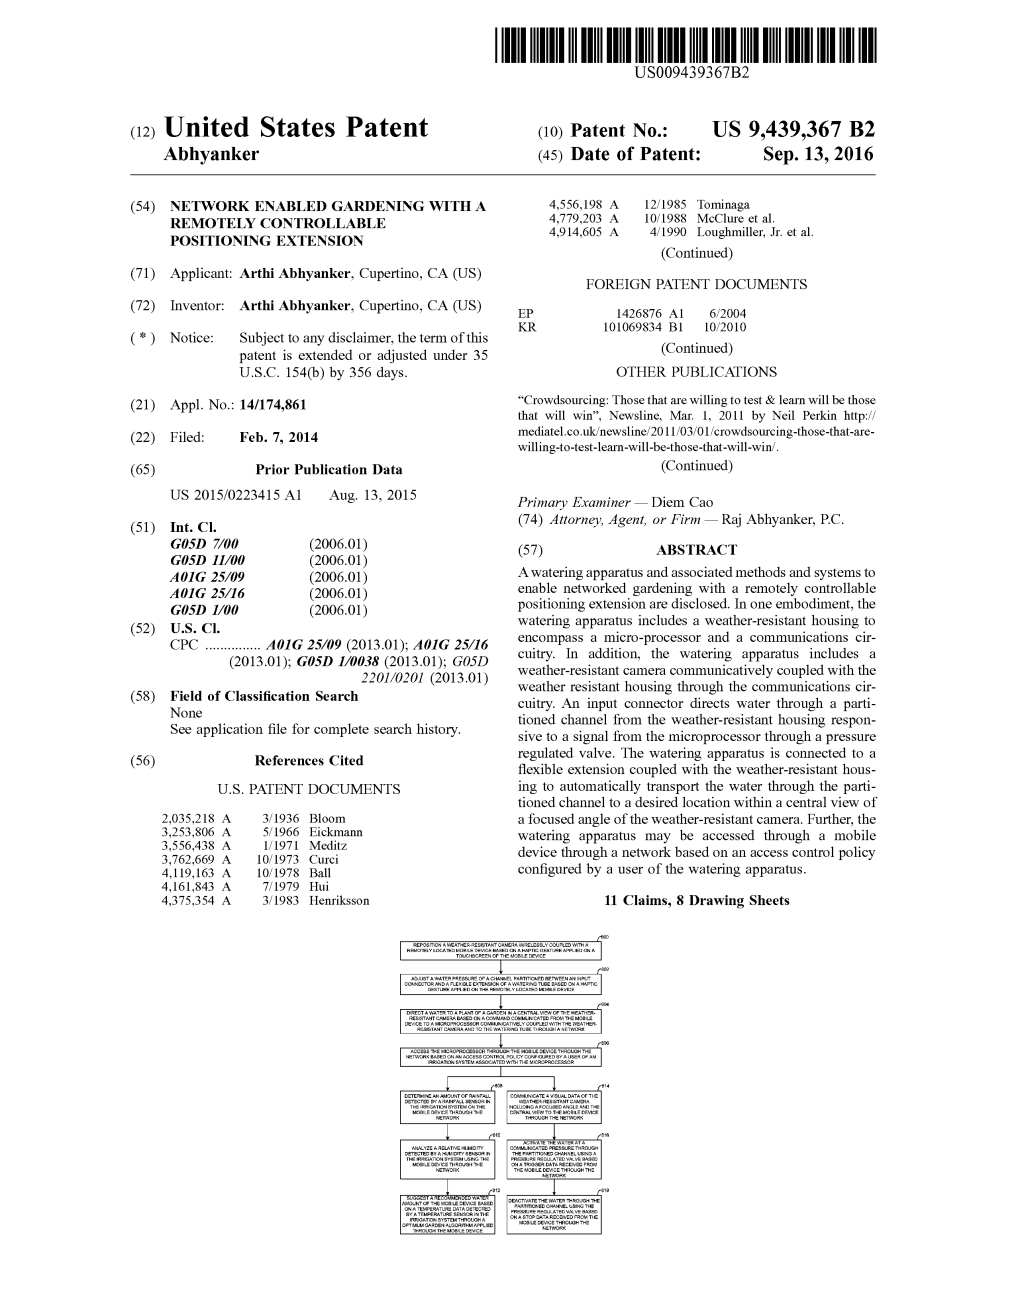 (12) United States Patent (10) Patent No.: US 9,439,367 B2 Abhyanker (45) Date of Patent: Sep